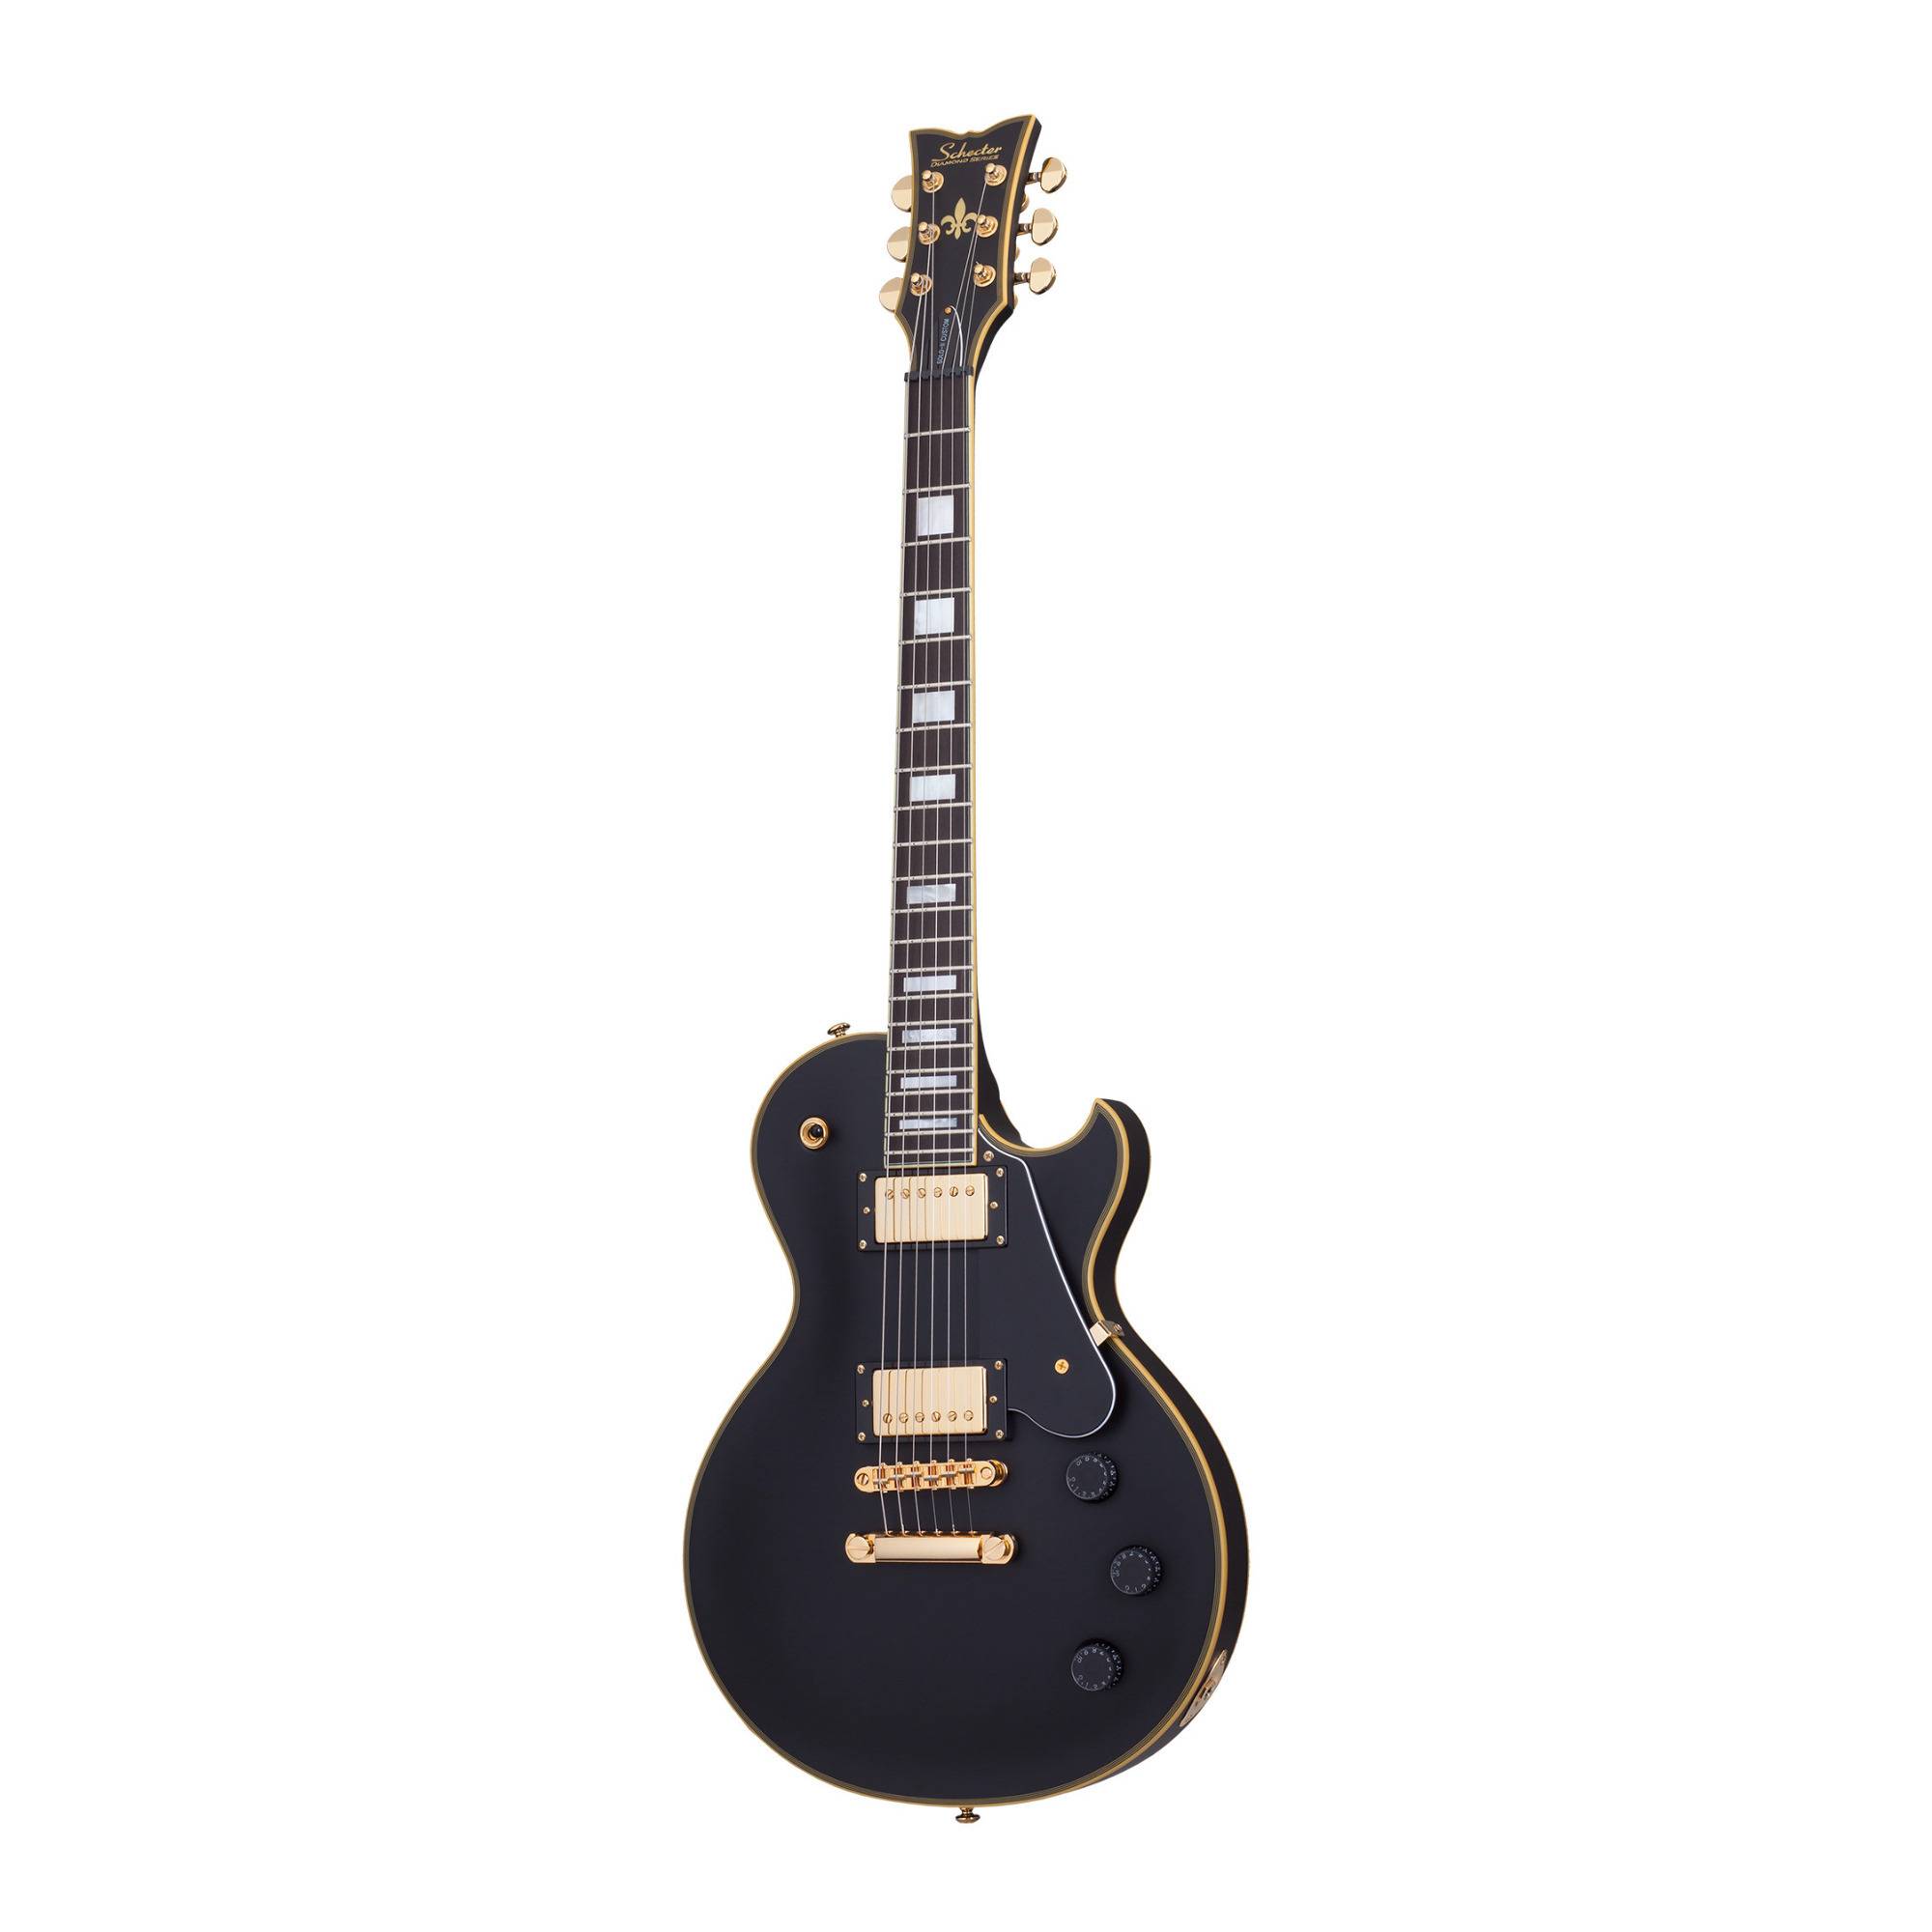 Schecter Solo-II Custom 6-String Electric Guitar (Aged Black Satin)